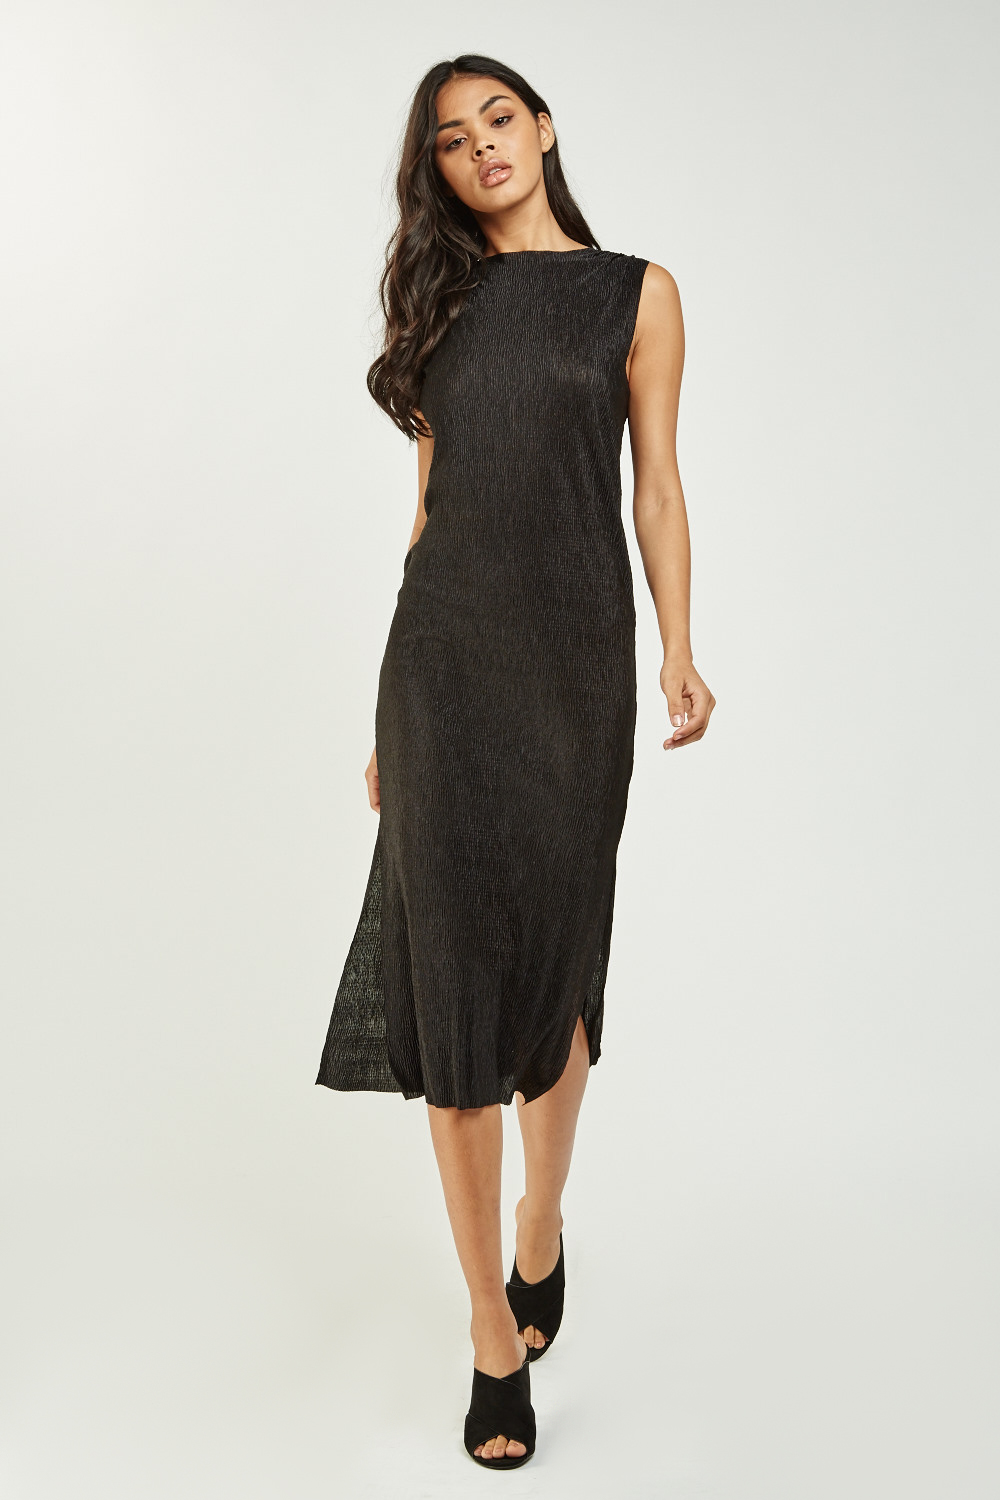 Knotted Open Back Plisse Dress - Just $3